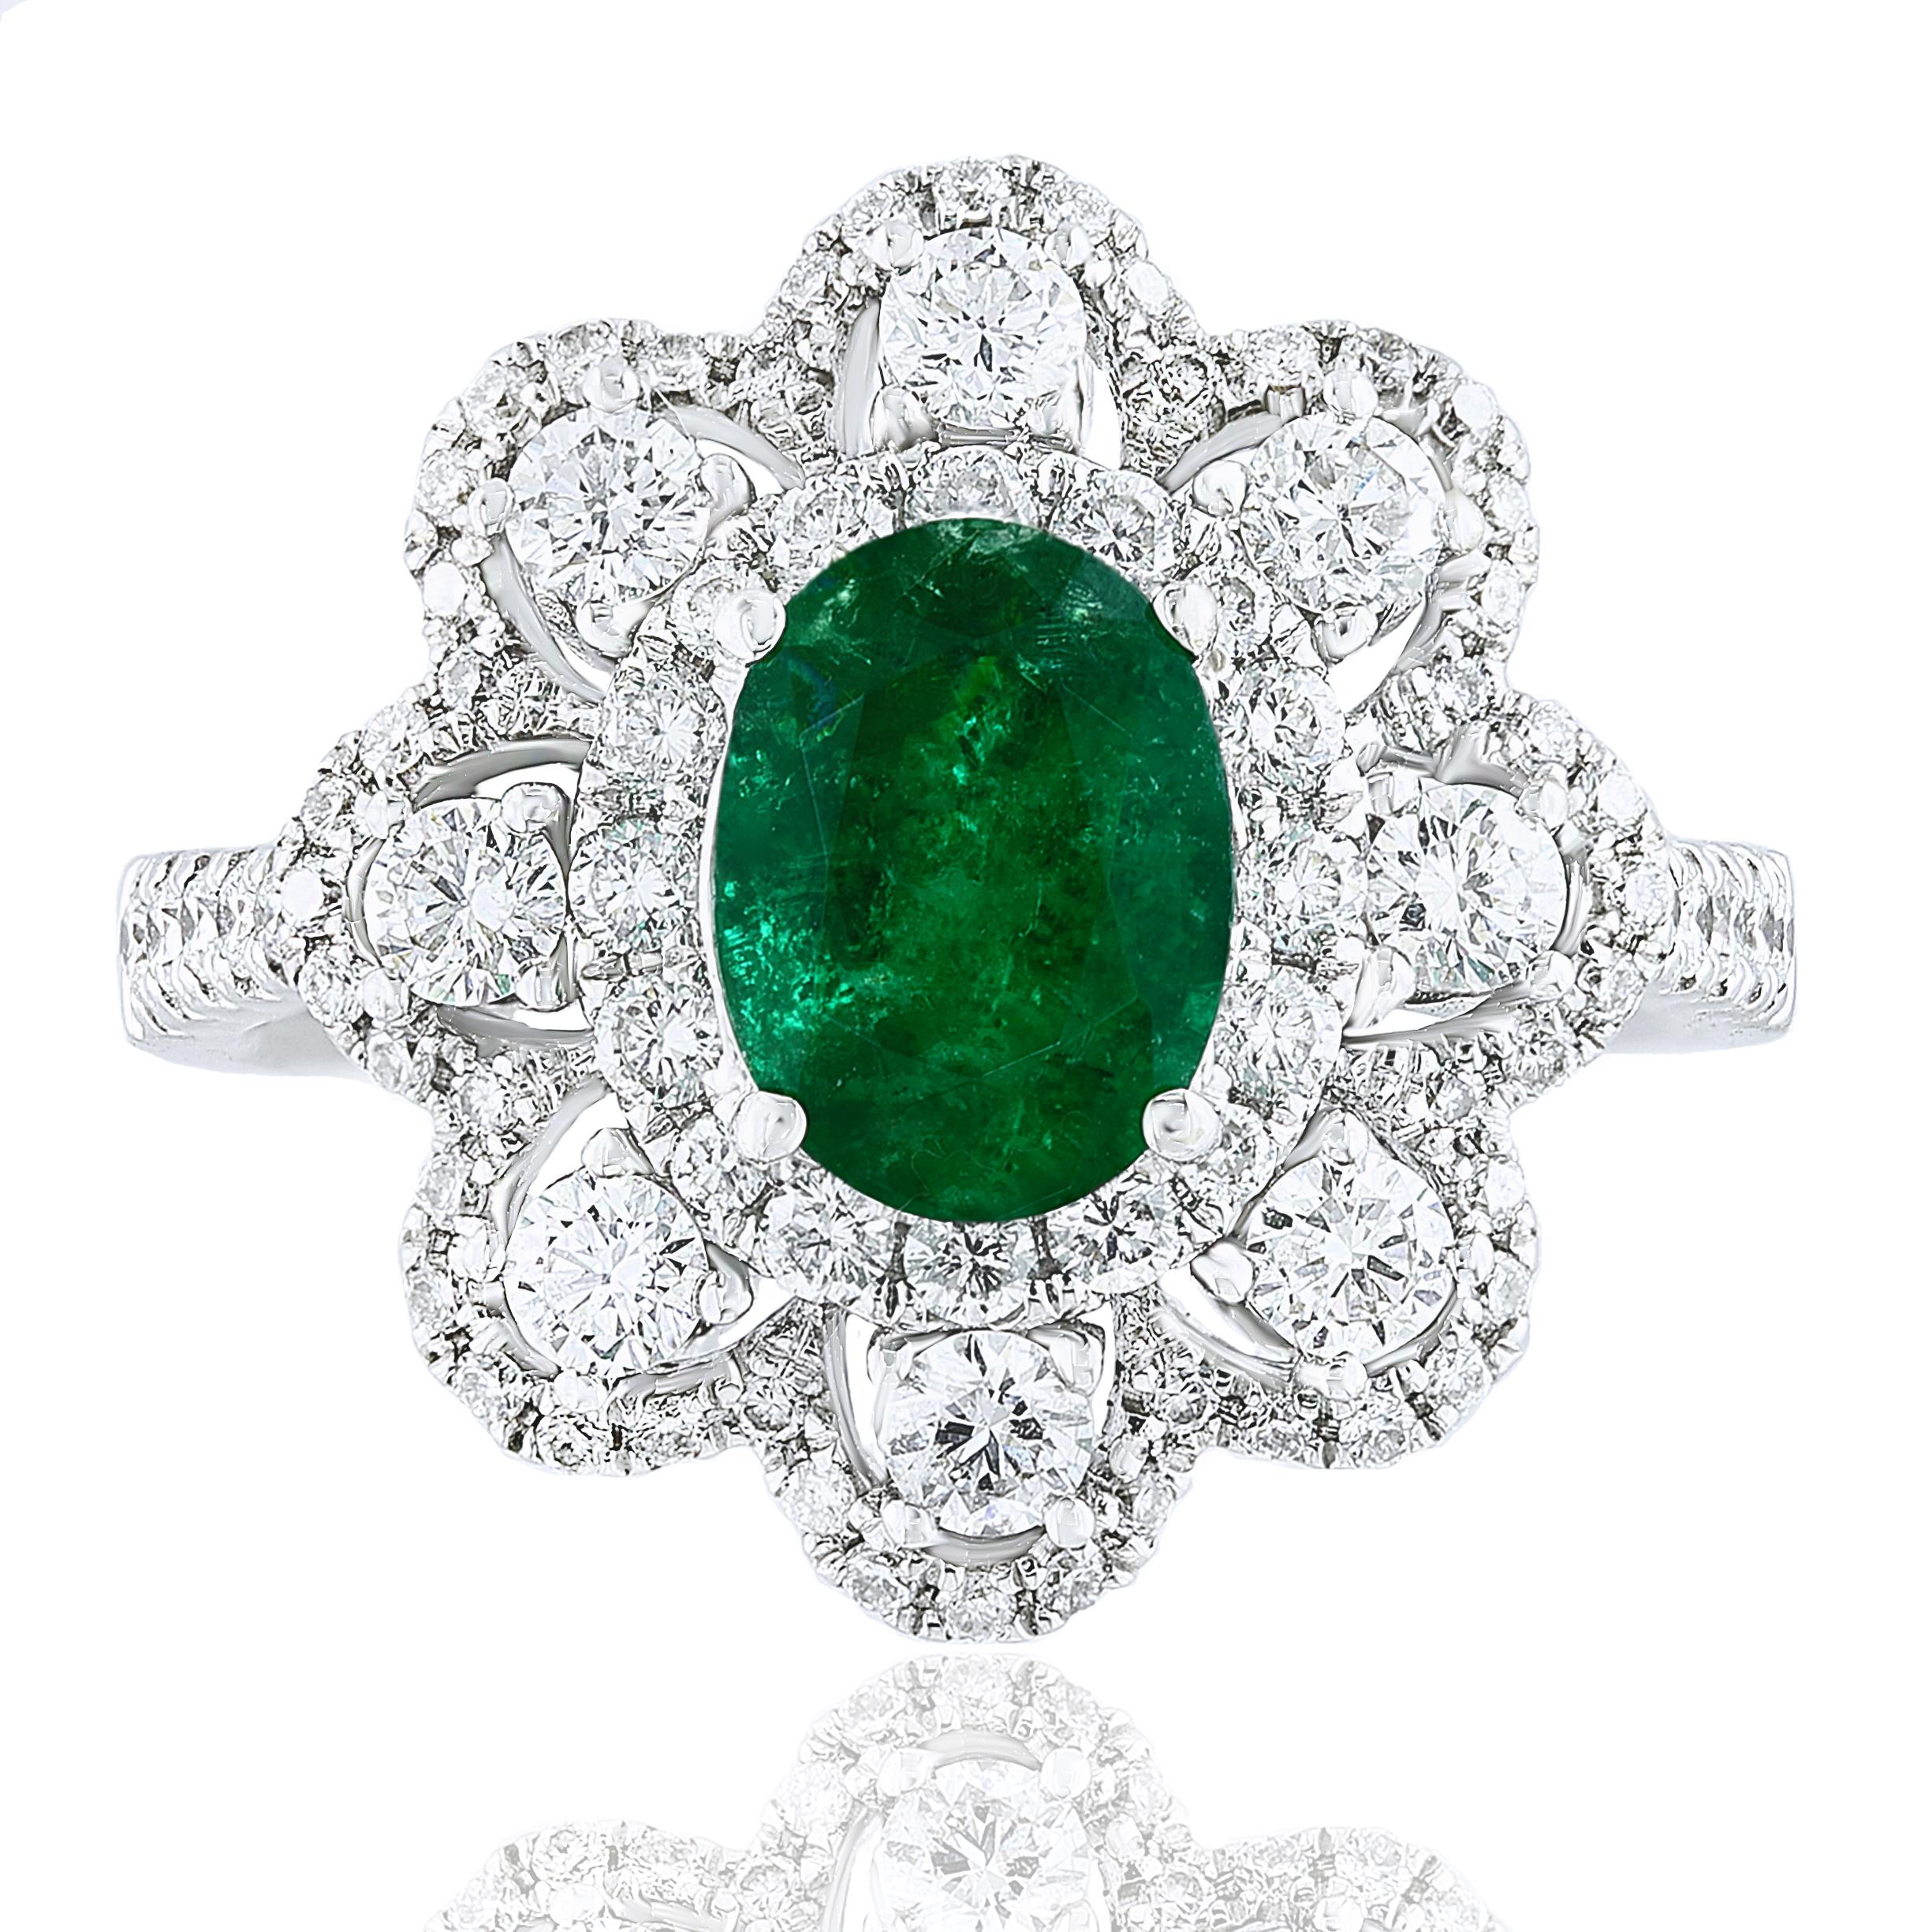 A stylish cocktail ring showcasing a 1.01-carat color-rich emerald, surrounded by rows of round brilliant diamonds in a flower design. 54 Diamonds weigh 1.10 carats in total. Made in 18k white gold.

Size 6.5 US (Sizable). One of a Kind piece.
All